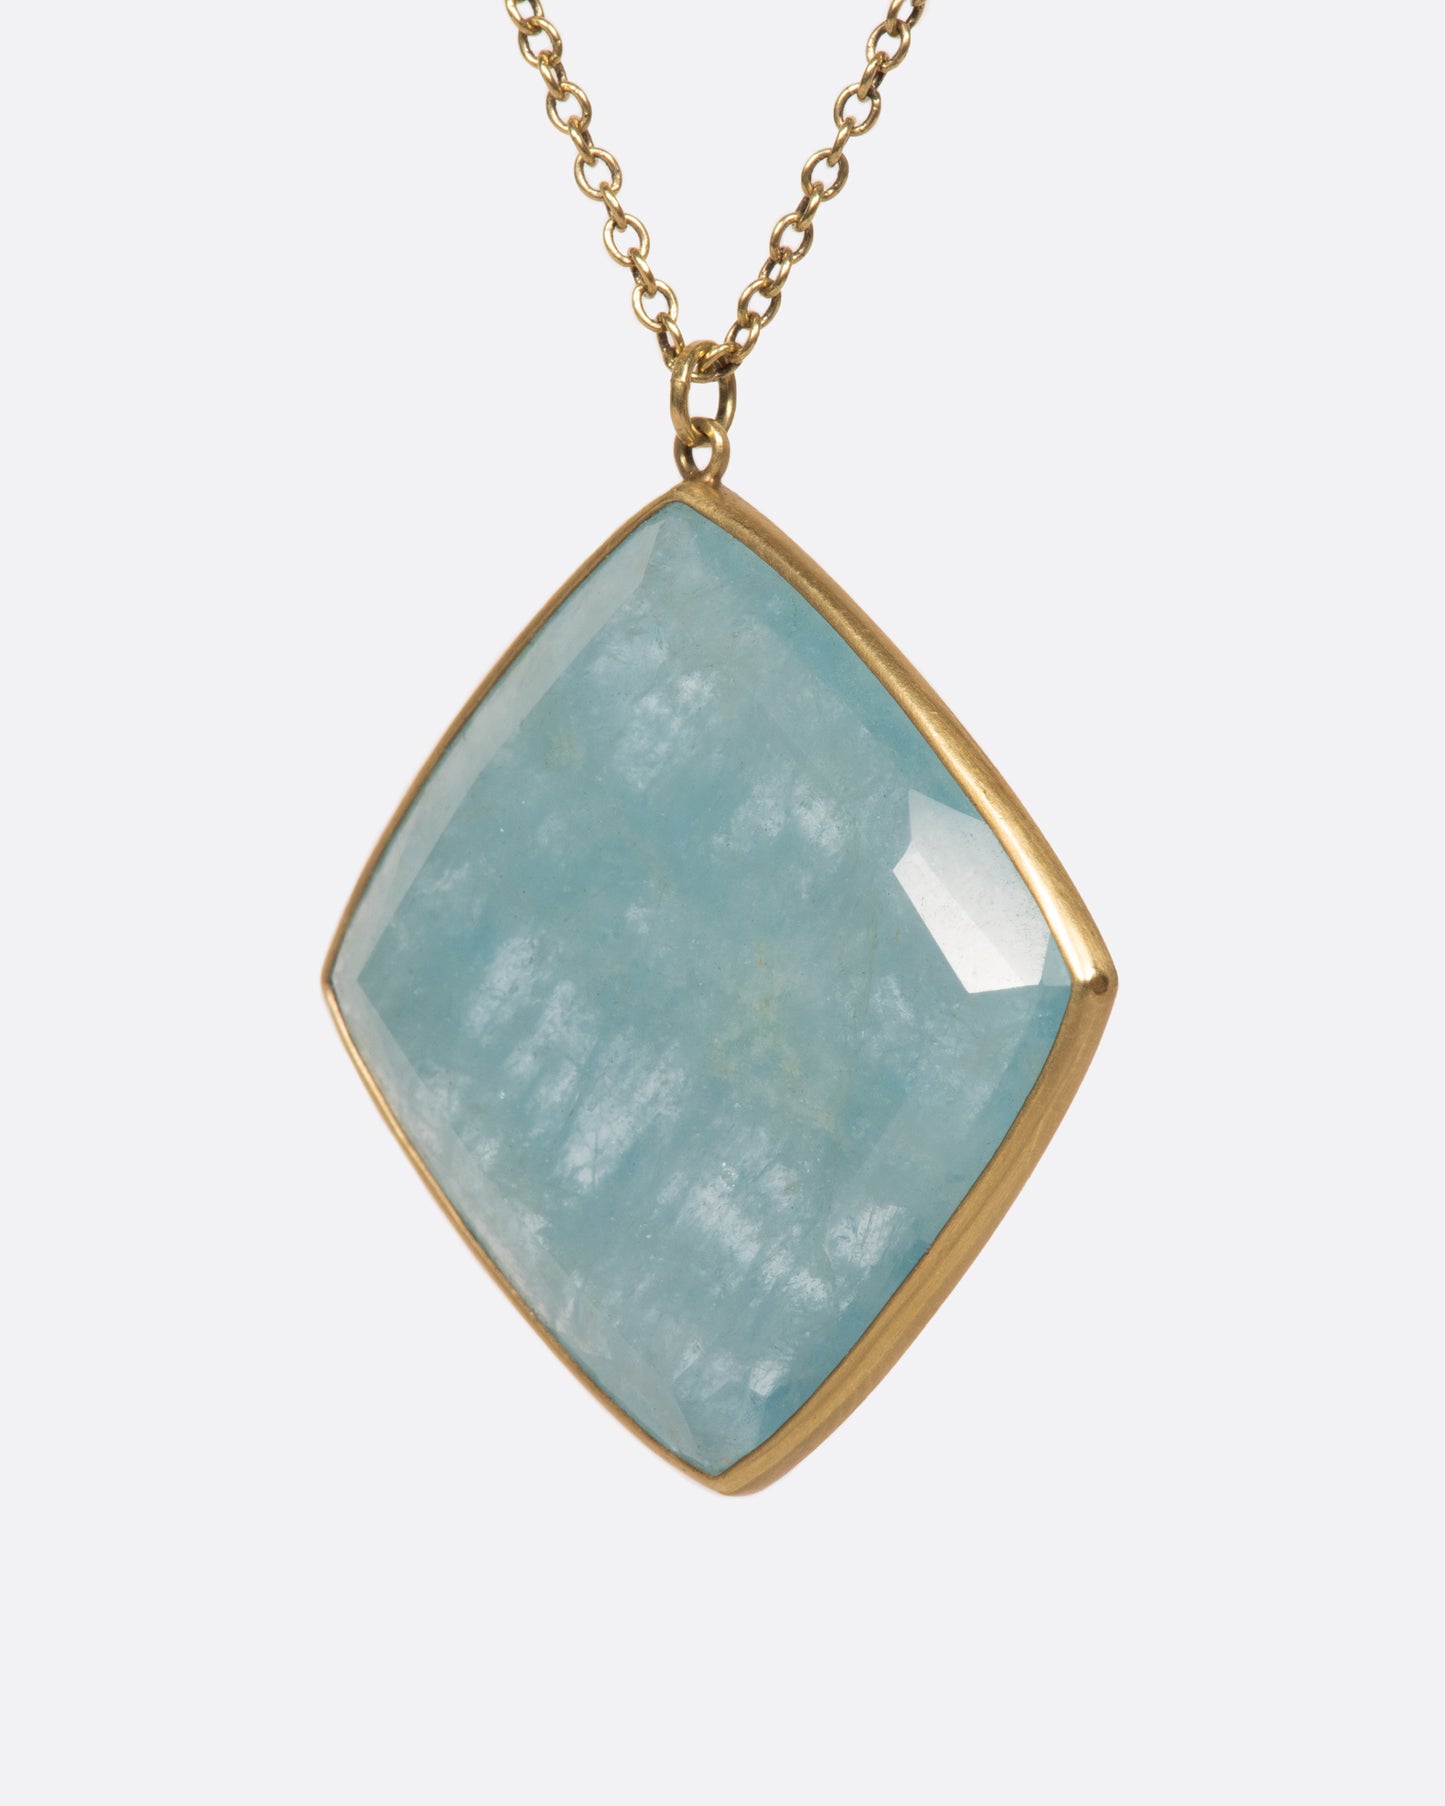 A large square aquamarine pendant hangings on a green gold chain, shown from the side.